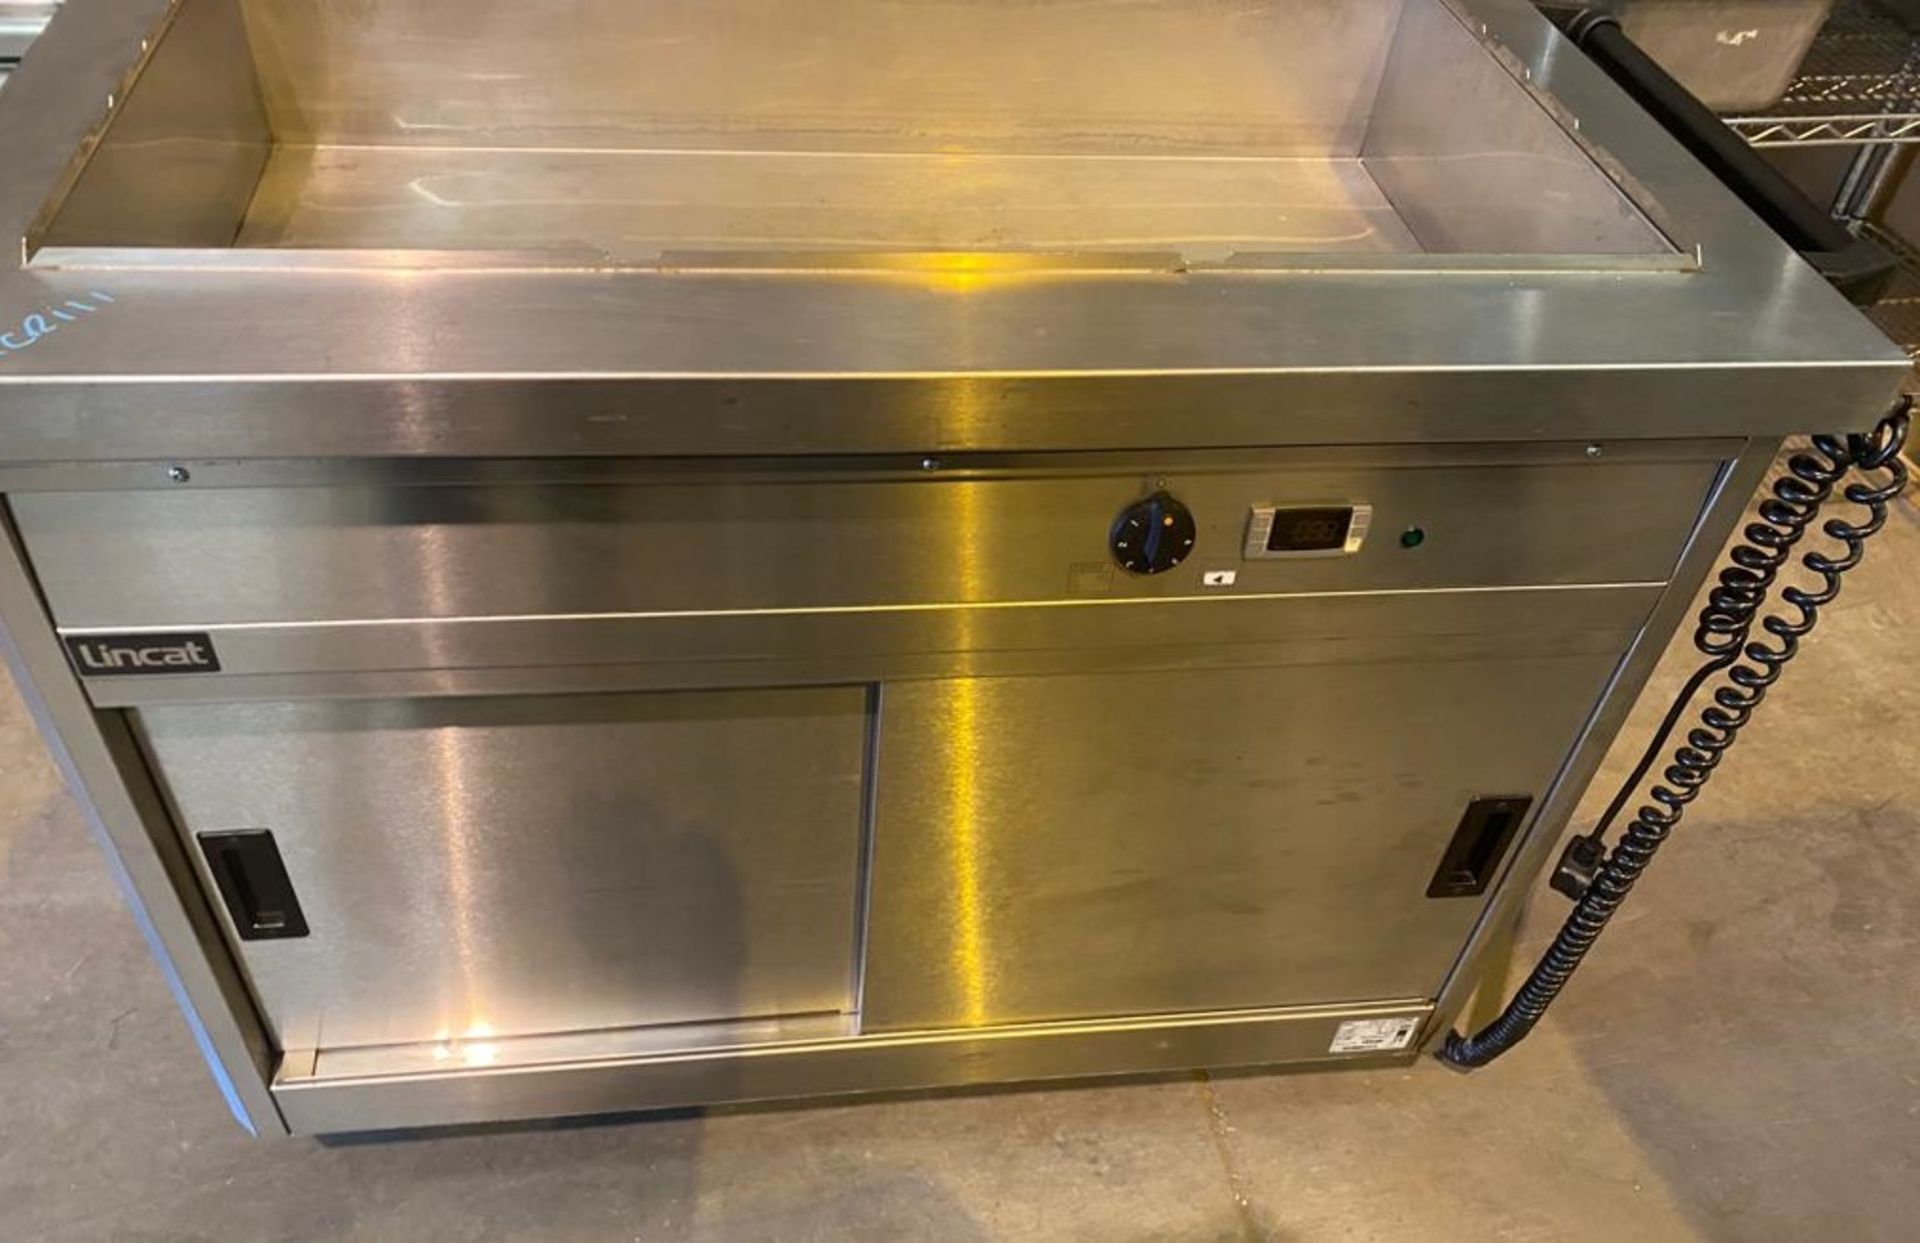 1 x Lincat Panther 670 Series Hot Cupboard with Bain Marie - Model P6B3 - RRP £2,300 - Image 8 of 10